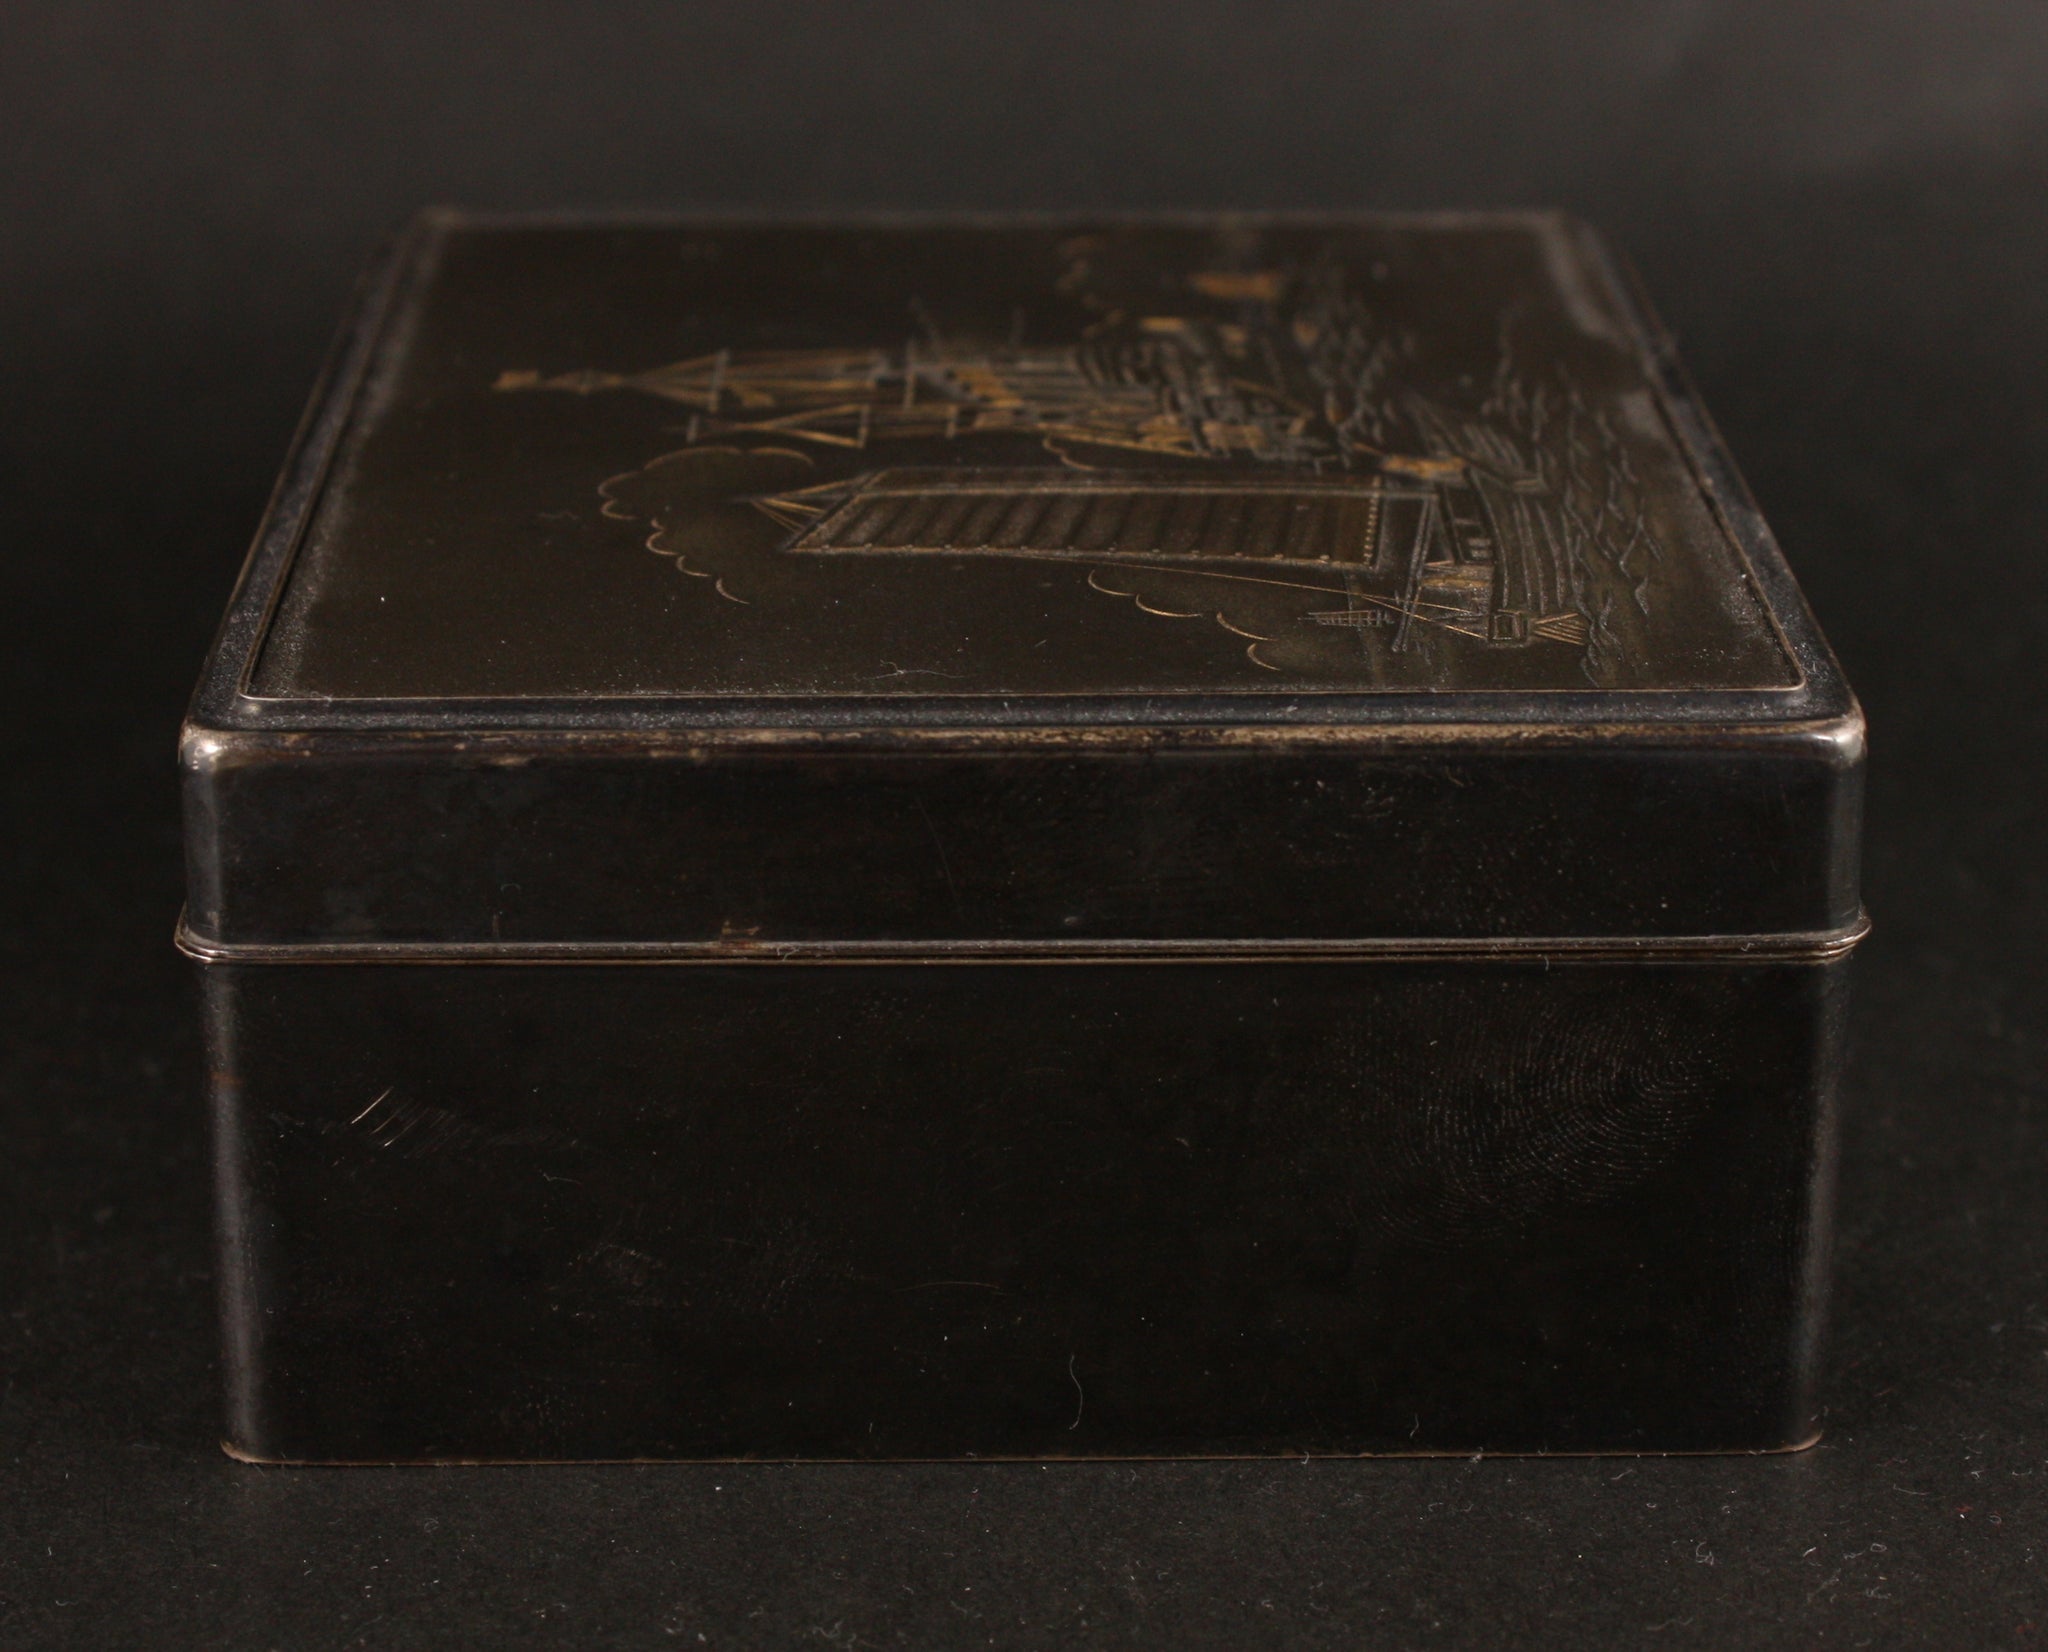 Incredibly Detailed Antique Japanese 1931 Cruiser Izumo Silver-lined Navy Lacquer Box